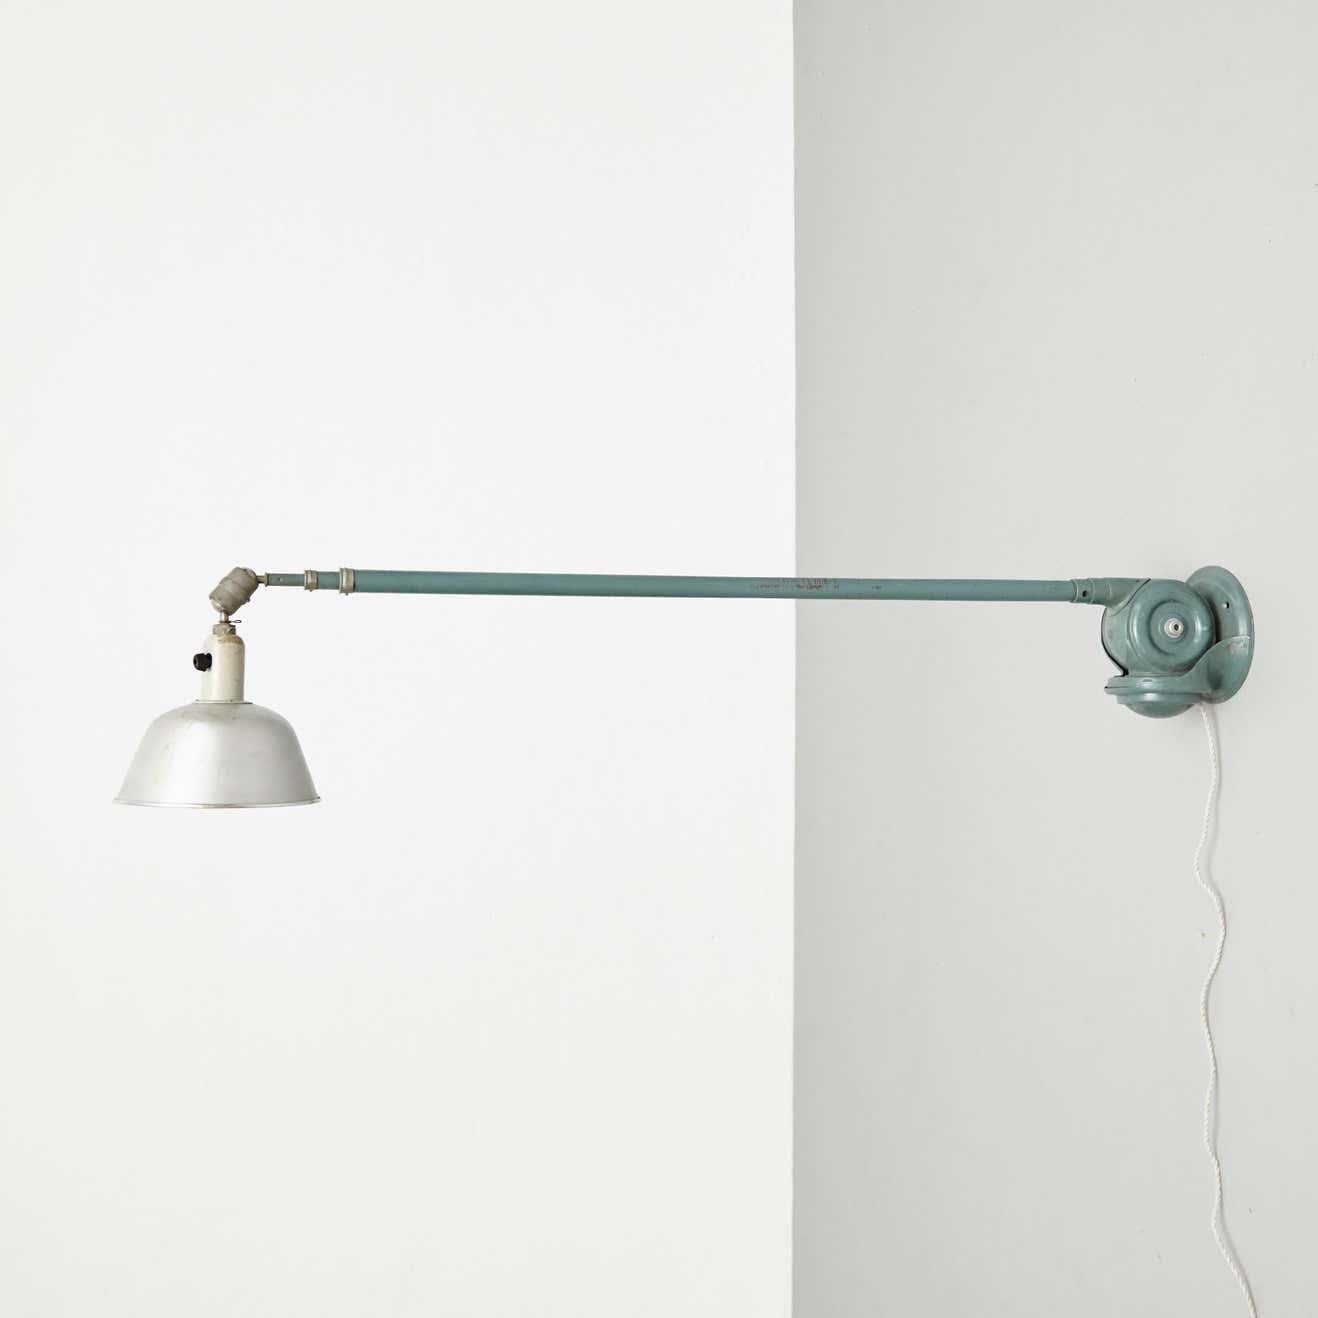 Wall lamp designed by Johan Petter Johansson.
Manufactured by Triplex (Sweden), circa 1930.
In original condition, with minor wear consistent with age and use, preserving a beautiful patina.

Materials:
Aluminum 
Steel

Dimensions:
ø 23 cm